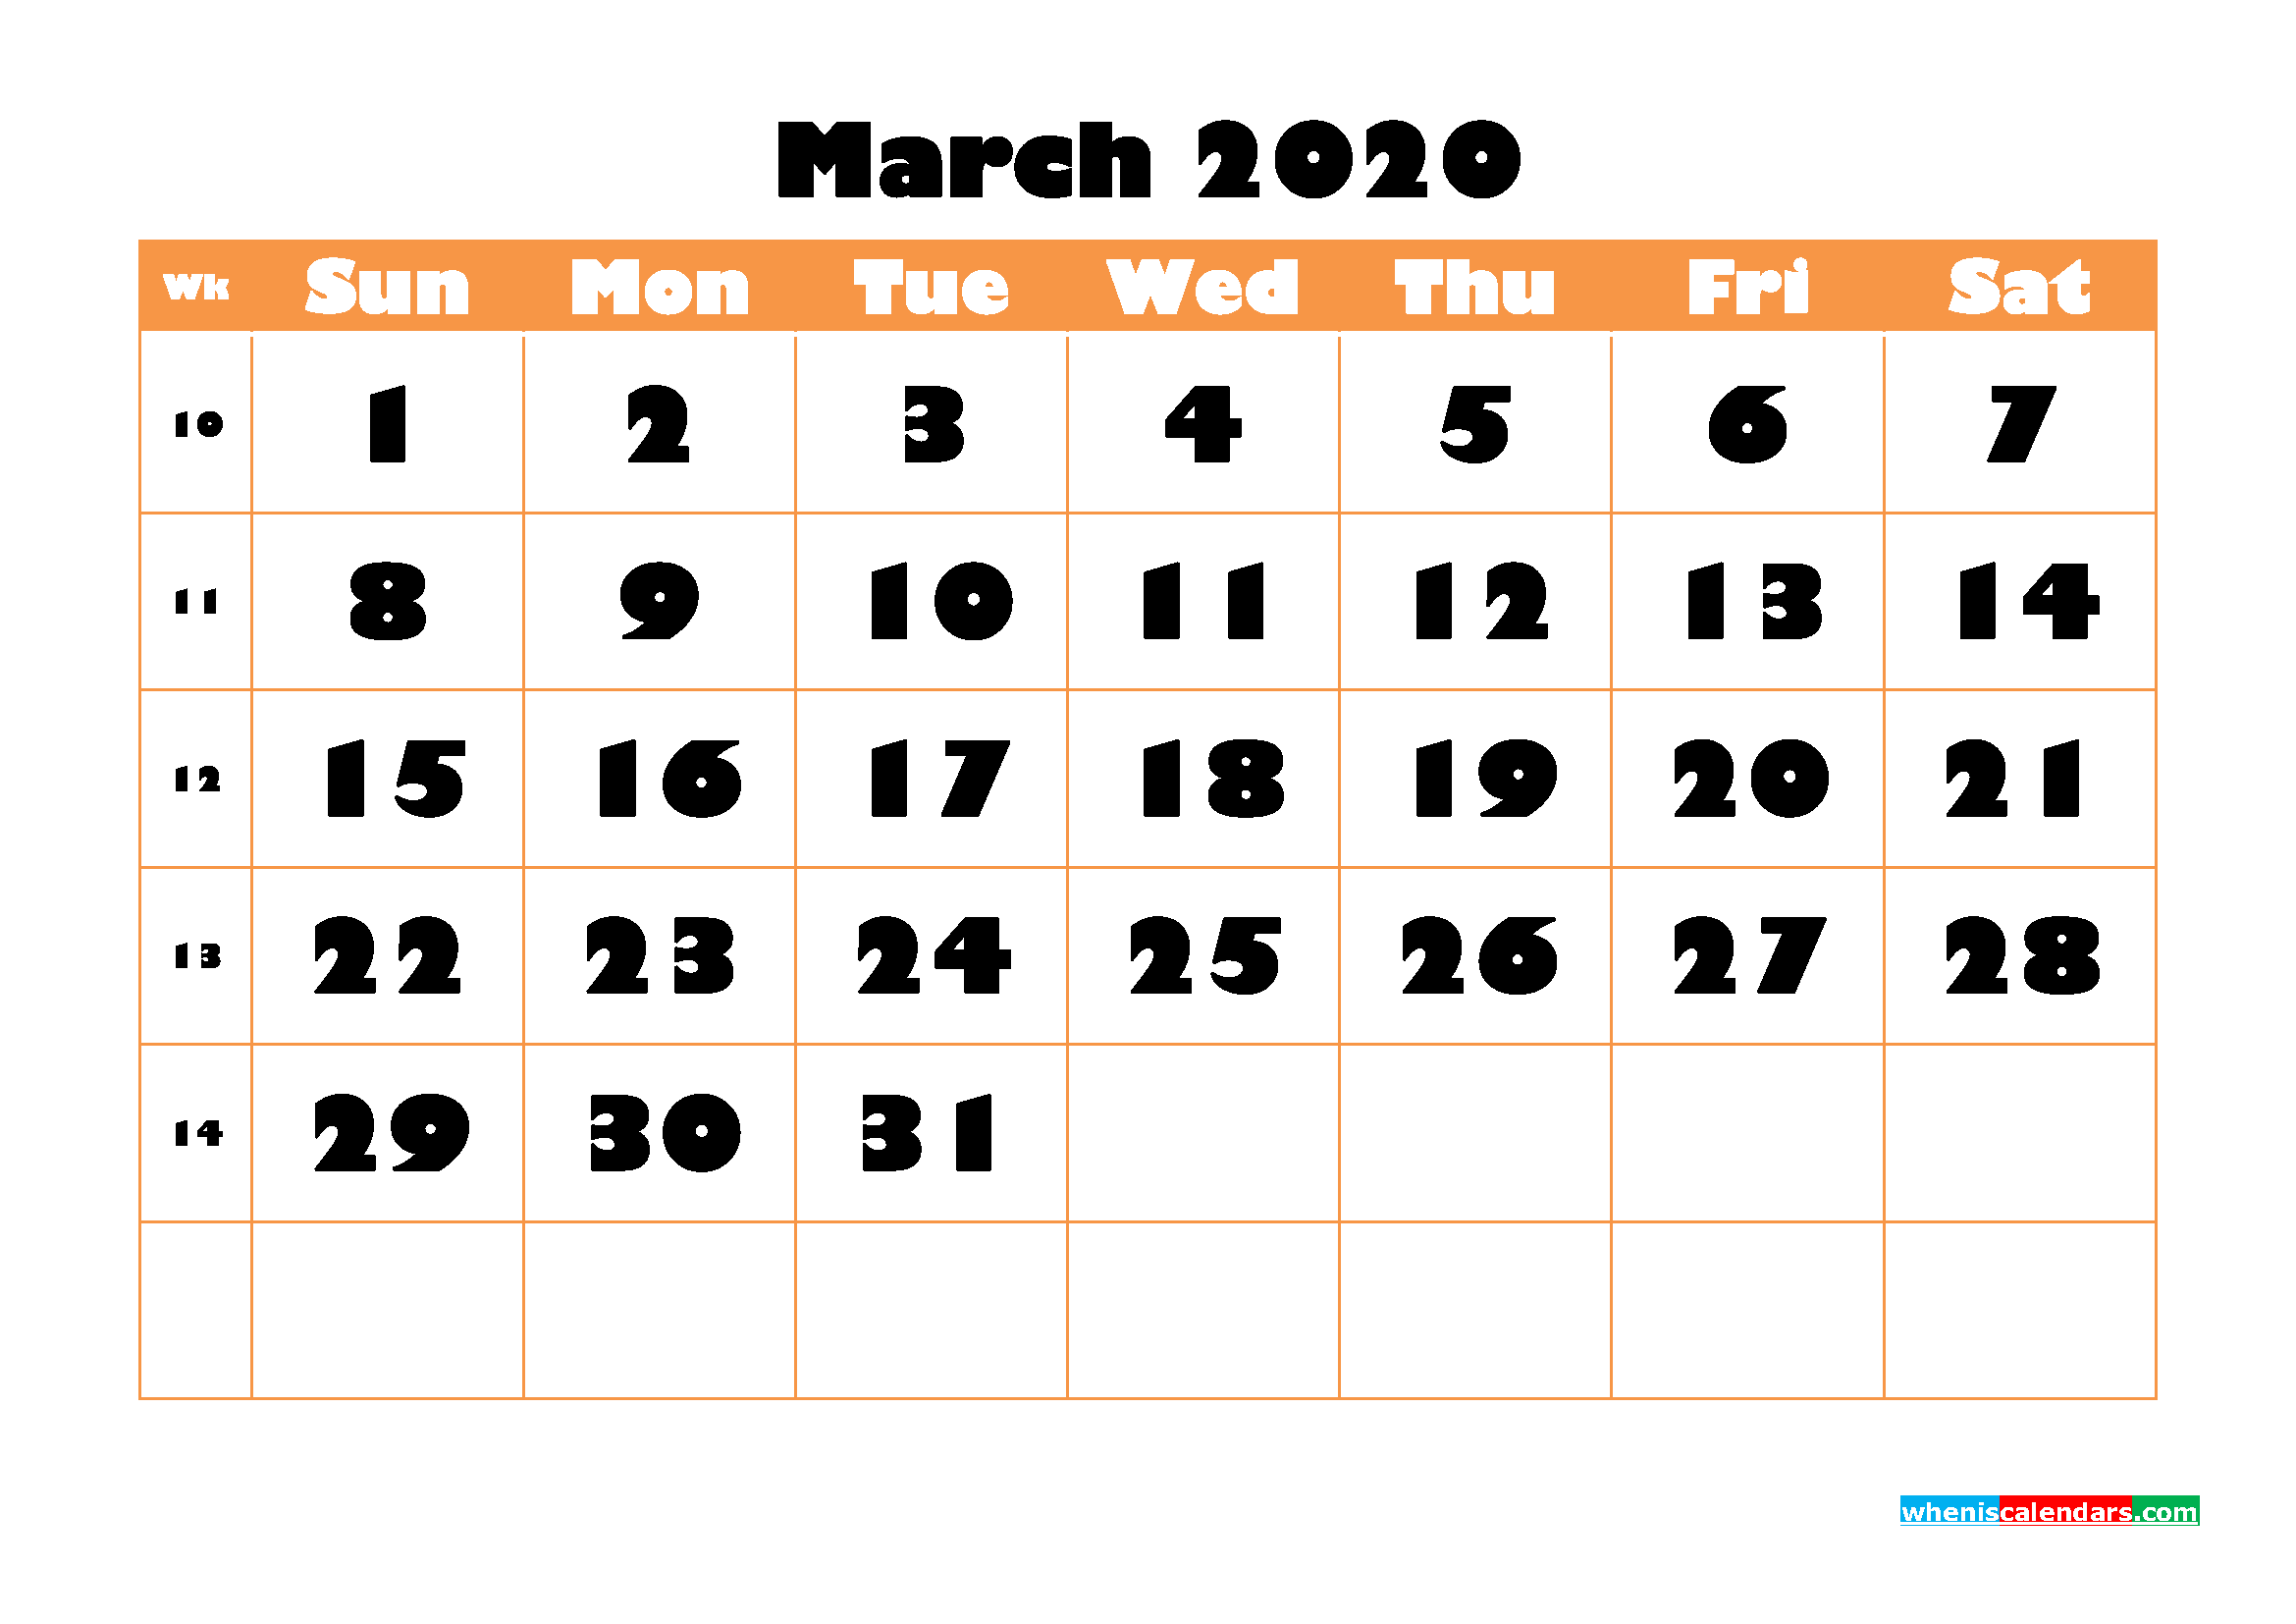 Monthly Printable Calendar 2020 March with Week Numbers